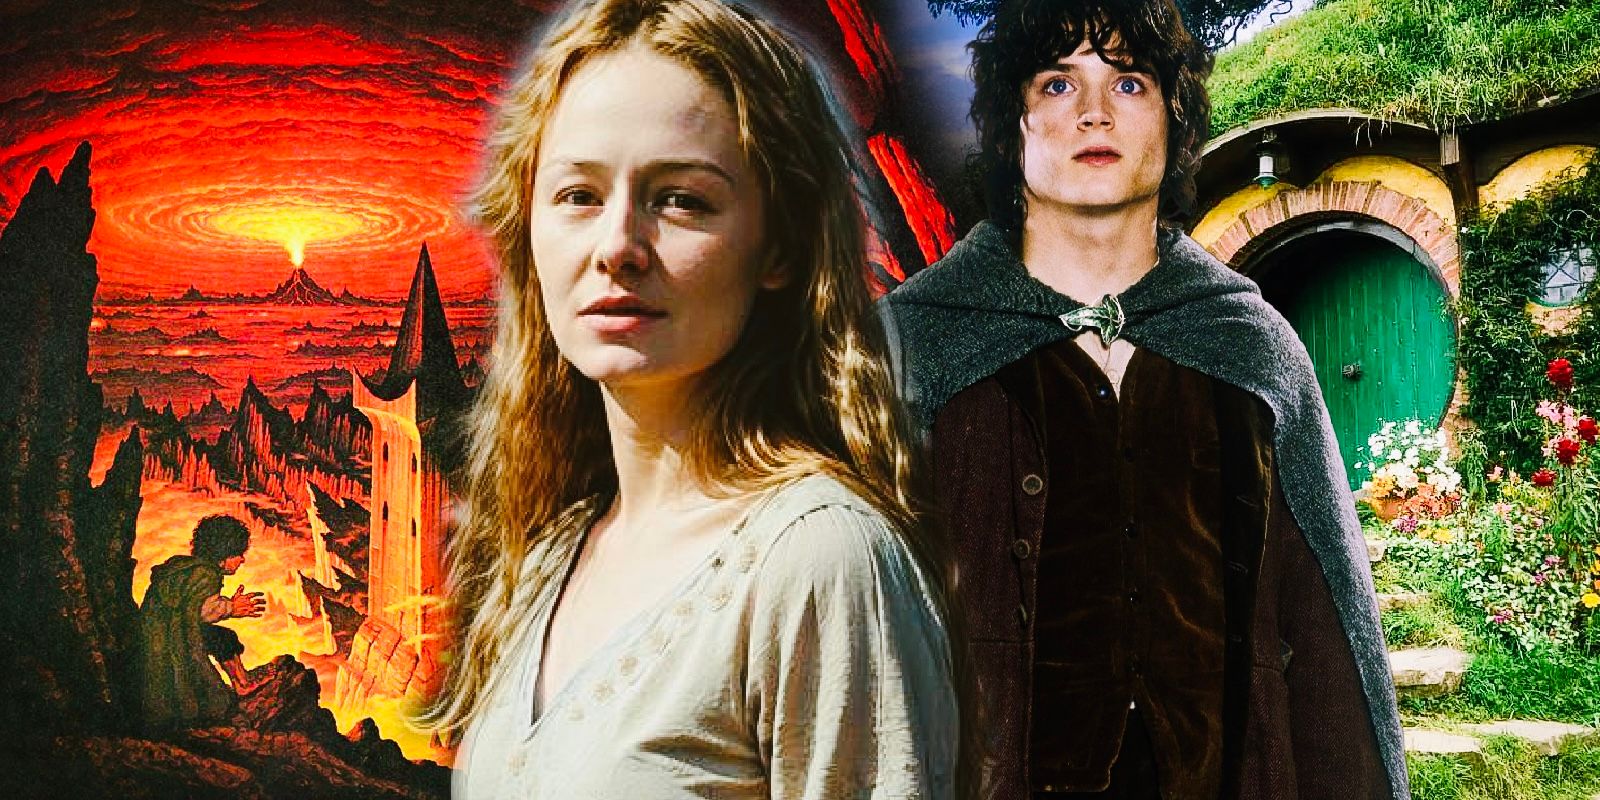 Eowyn and Frodo in the shire and Mordor from the Lord of the Rings films